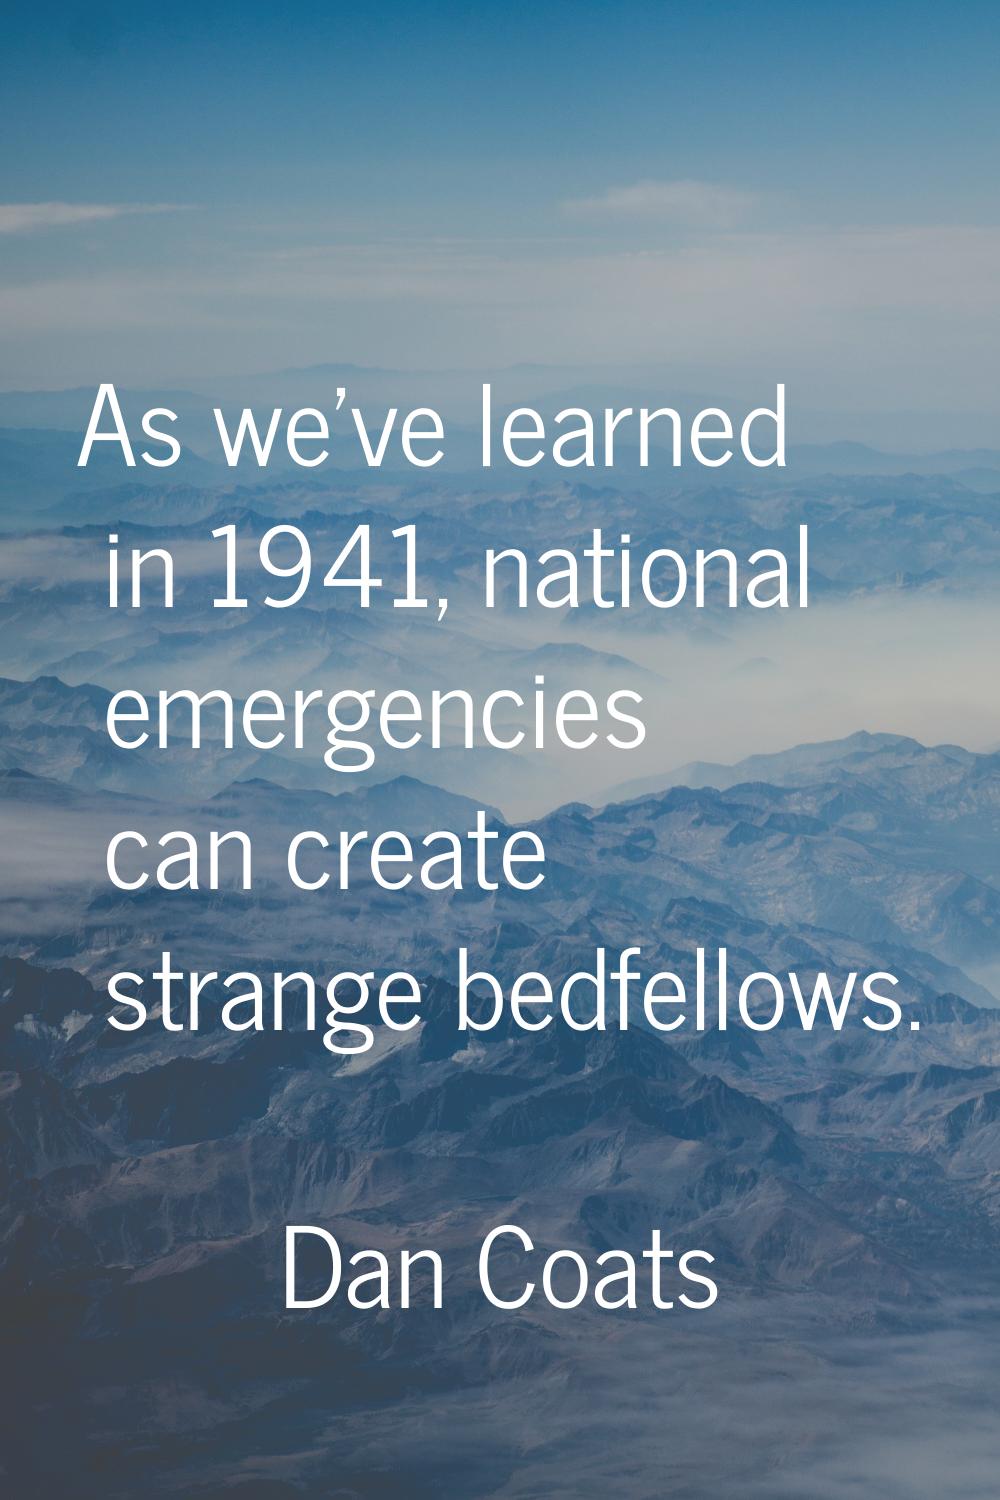 As we've learned in 1941, national emergencies can create strange bedfellows.